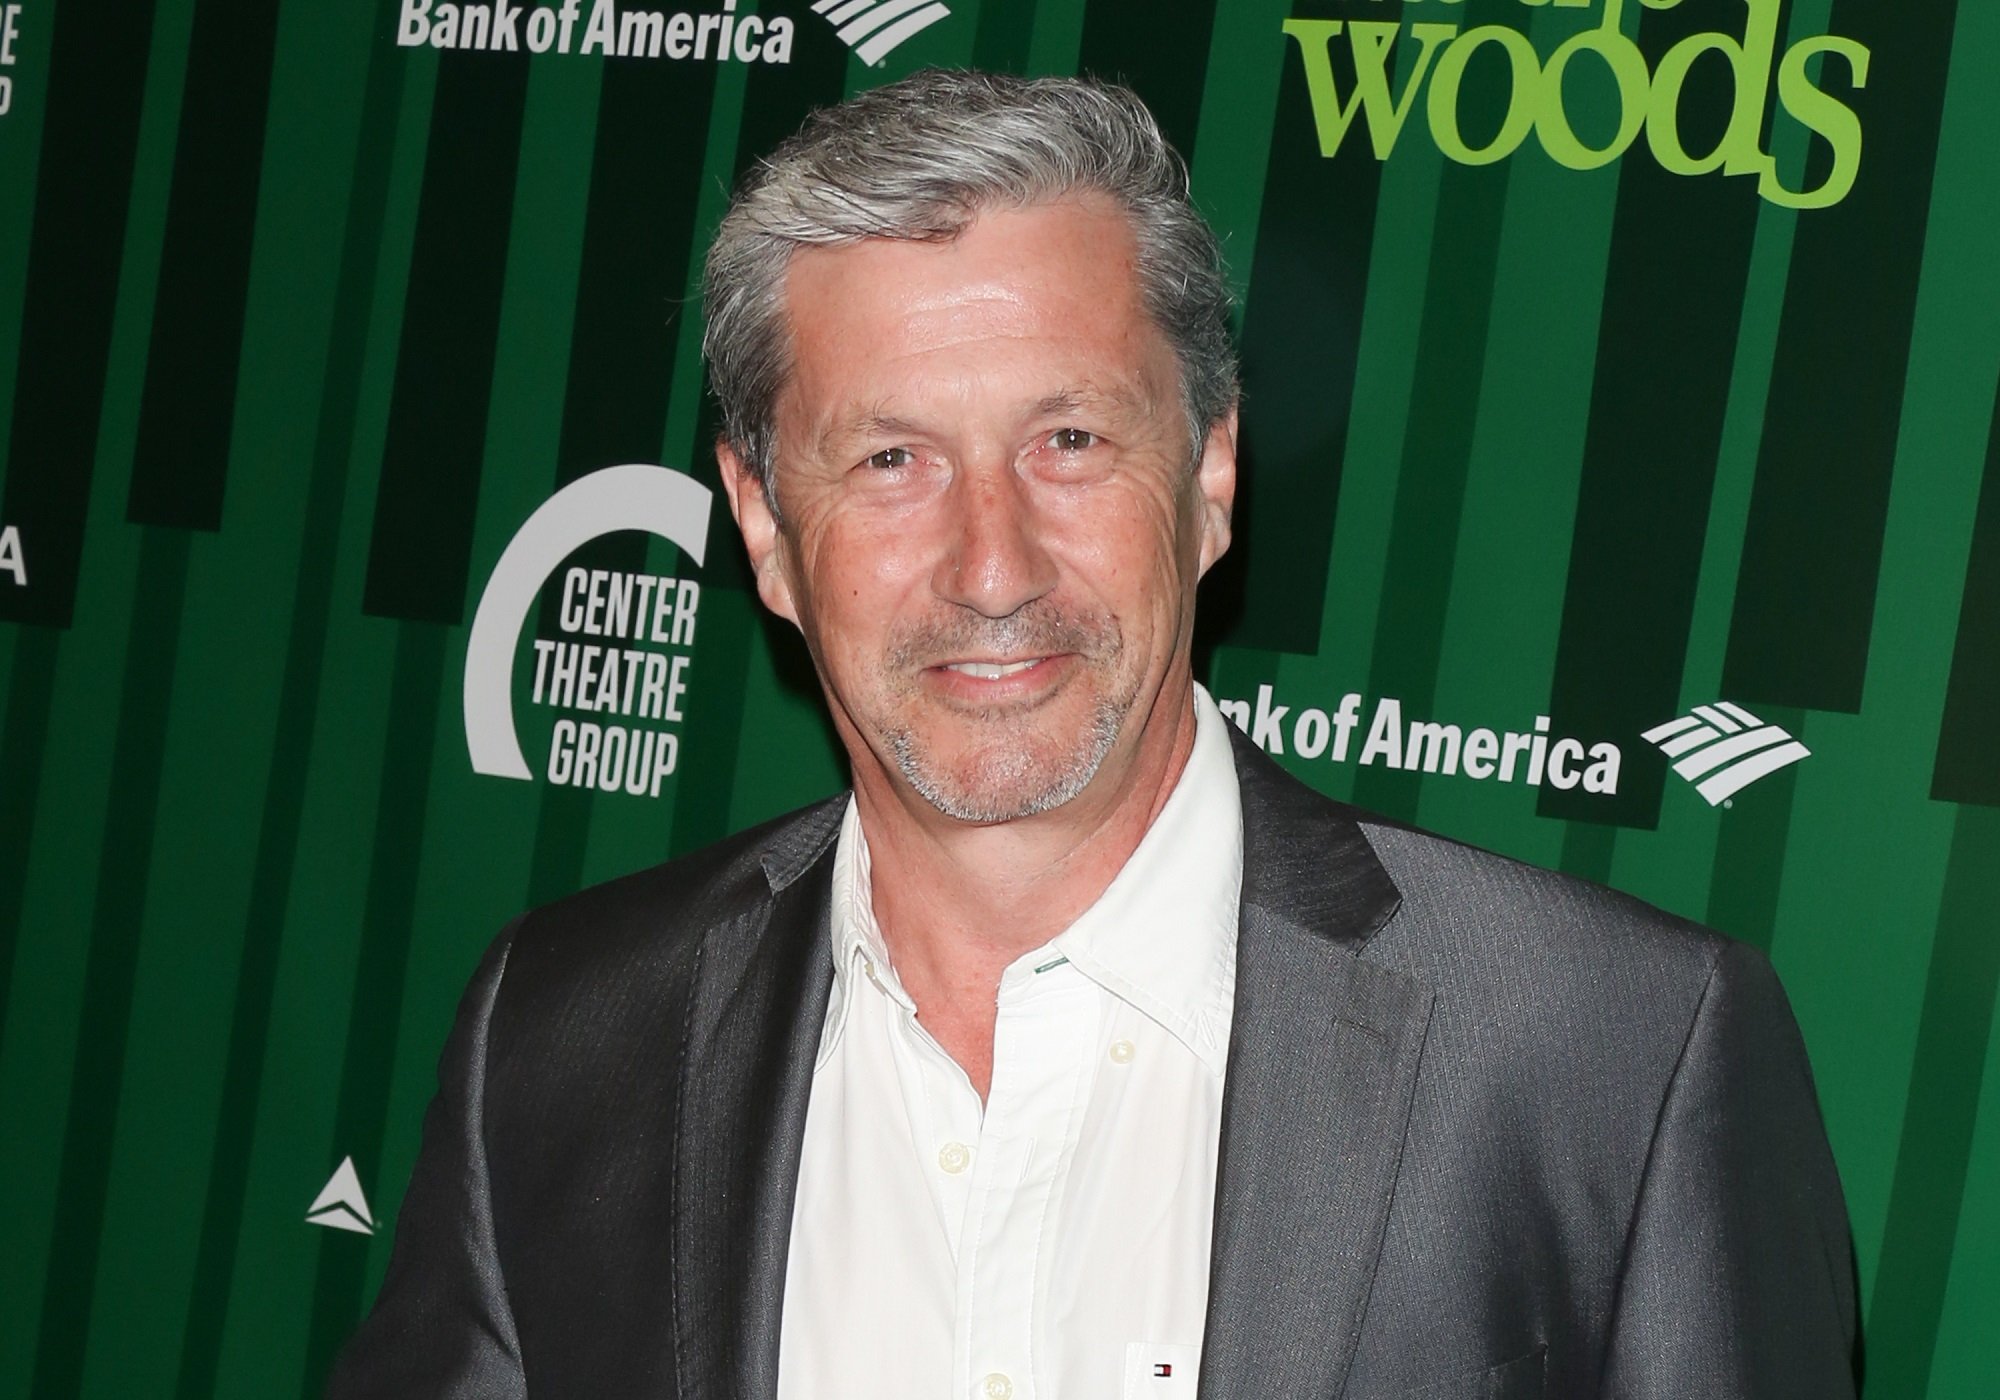 General Hospital and Days of Our Lives star Charles Shaughnessy, pictured here in a tailored grey suit with a white shirt